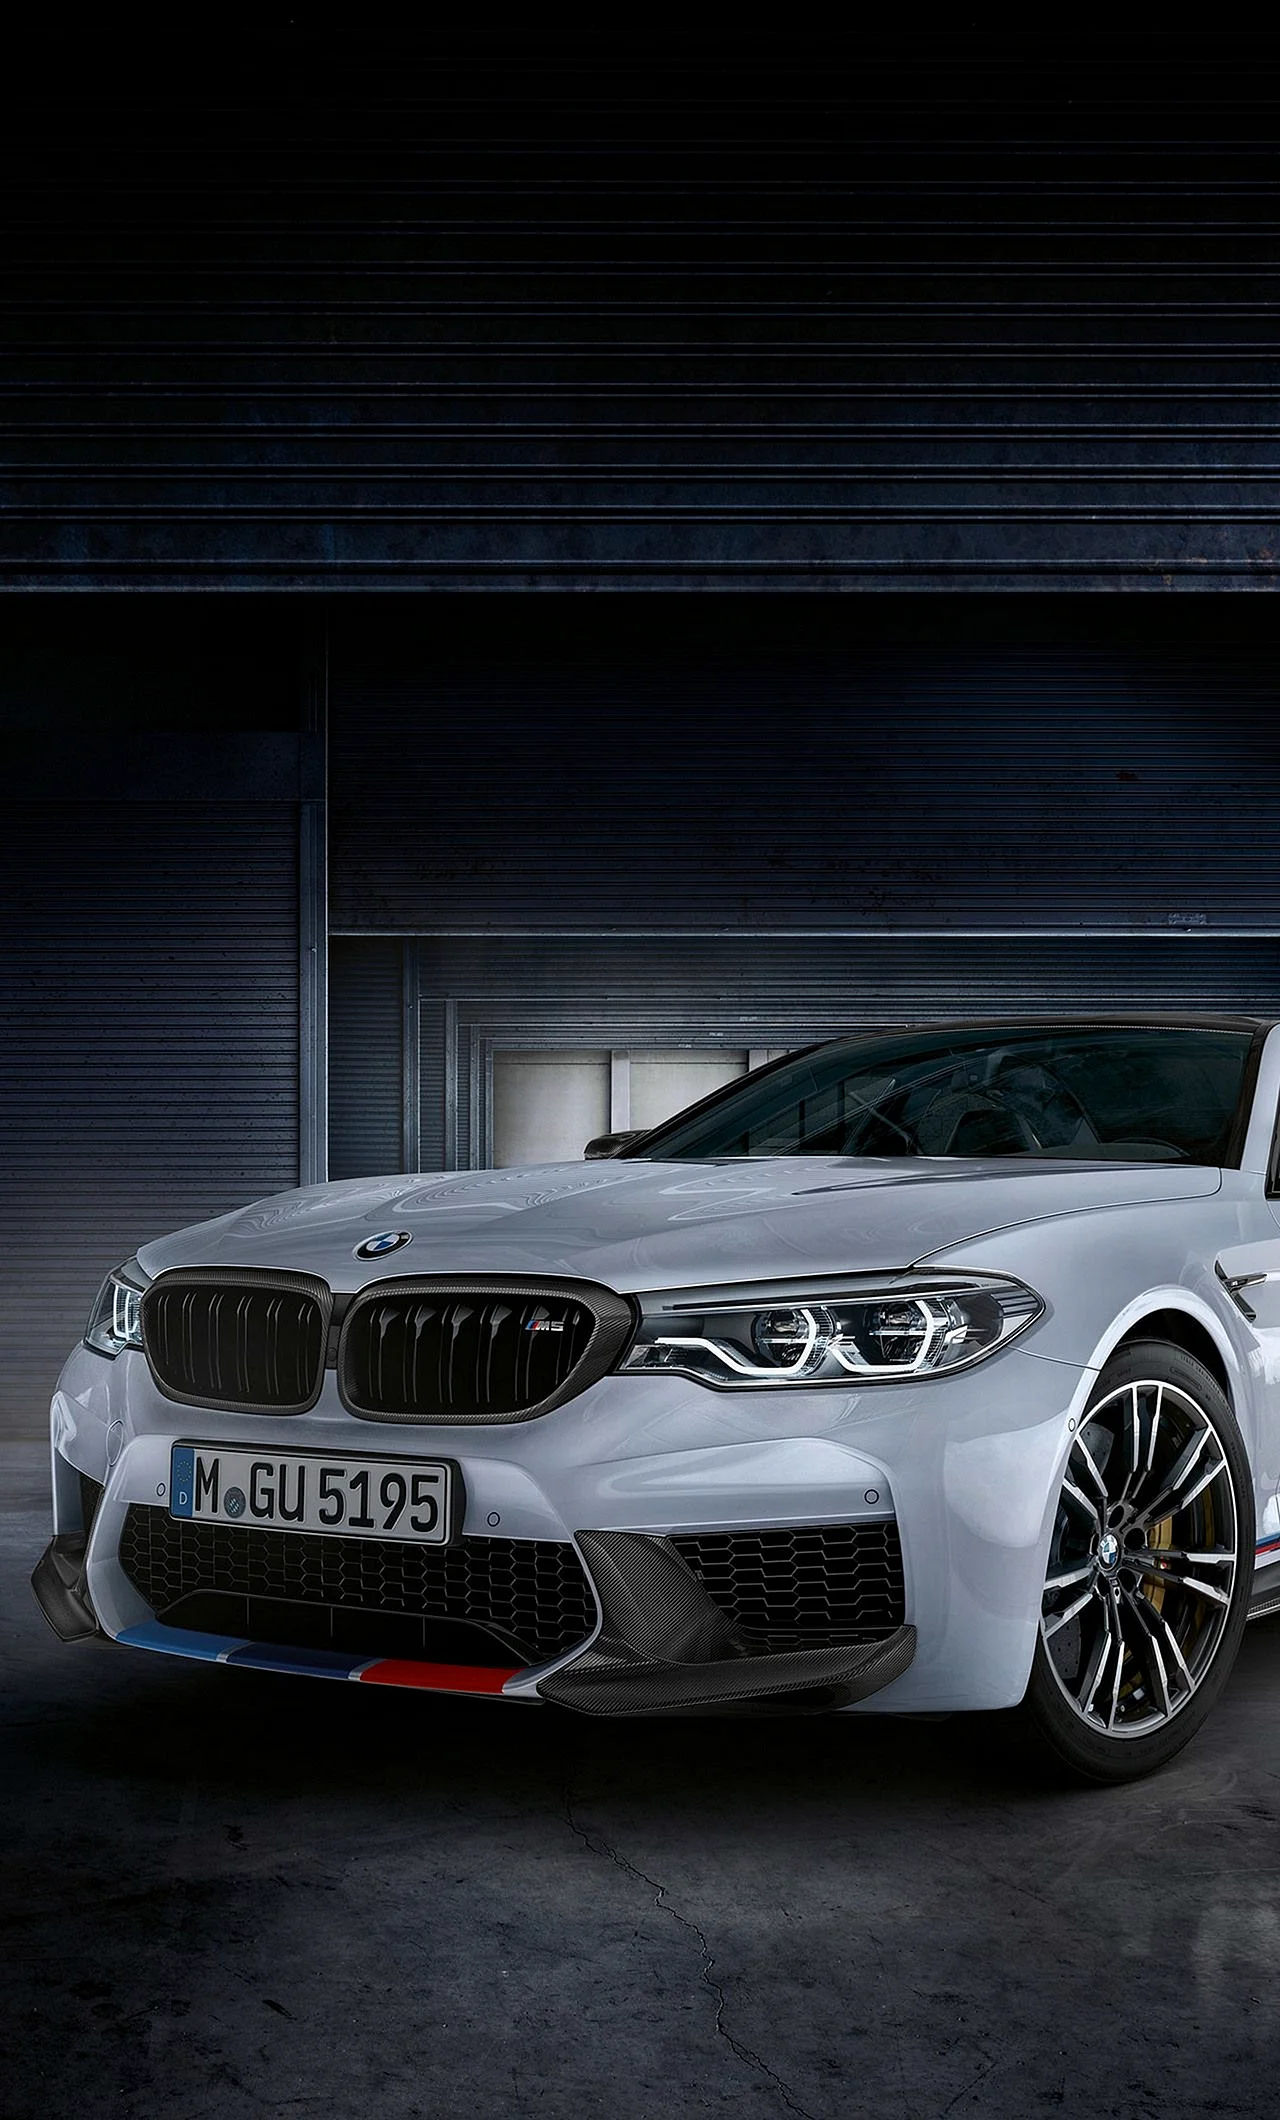 Bmw M5 F90 iPhone Wallpaper For iPhone